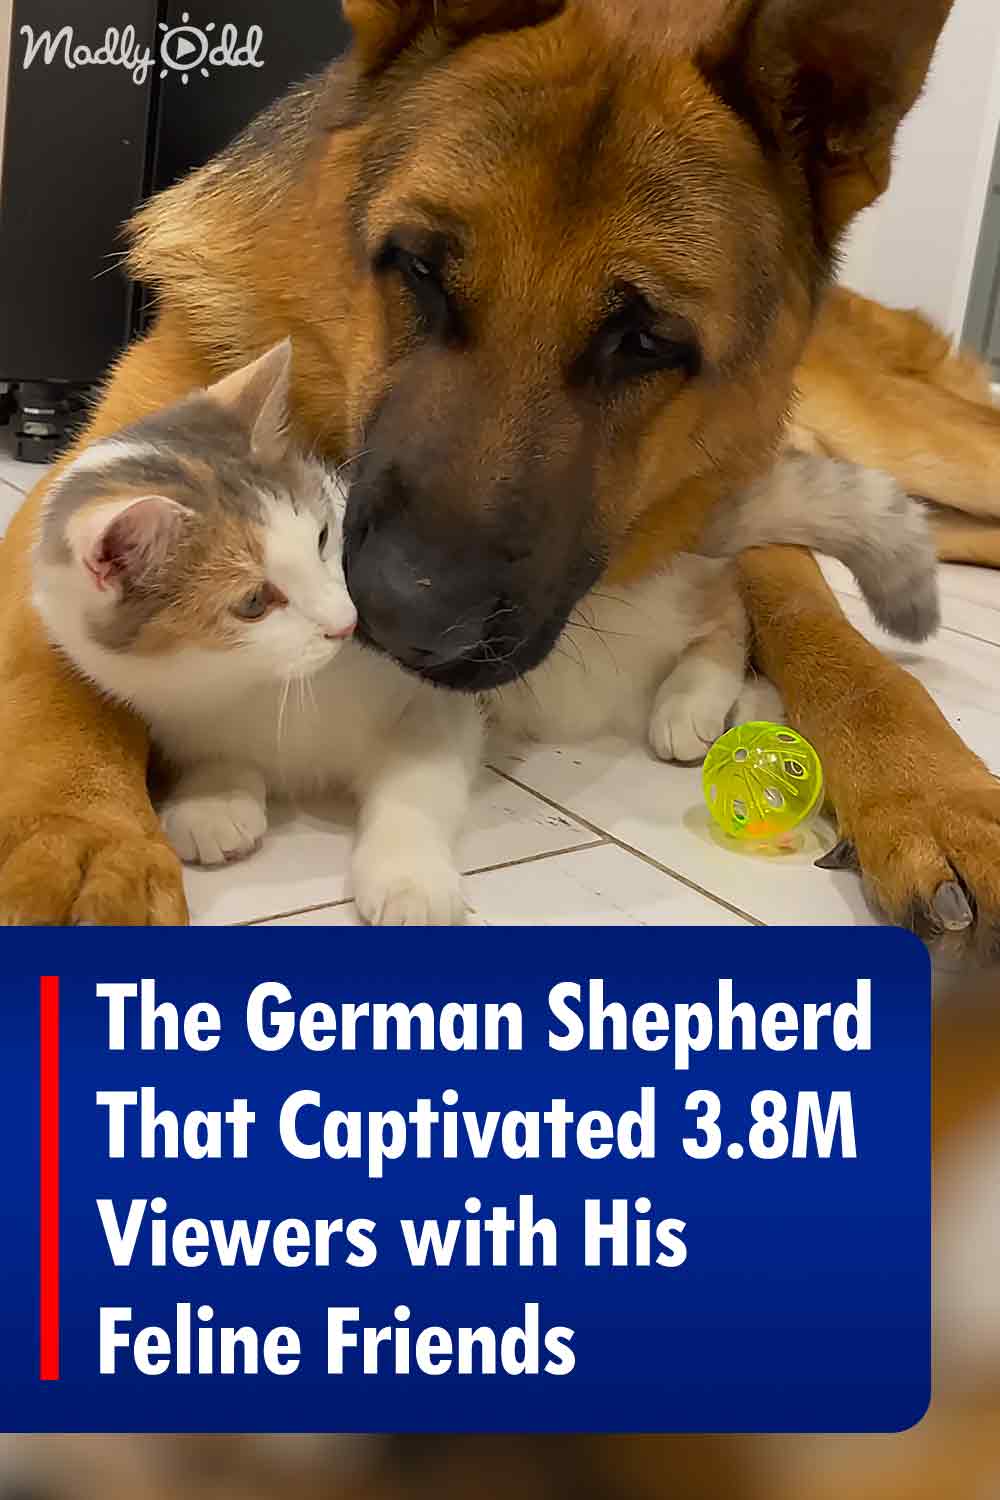 The German Shepherd That Captivated 3.8M Viewers with His Feline Friends